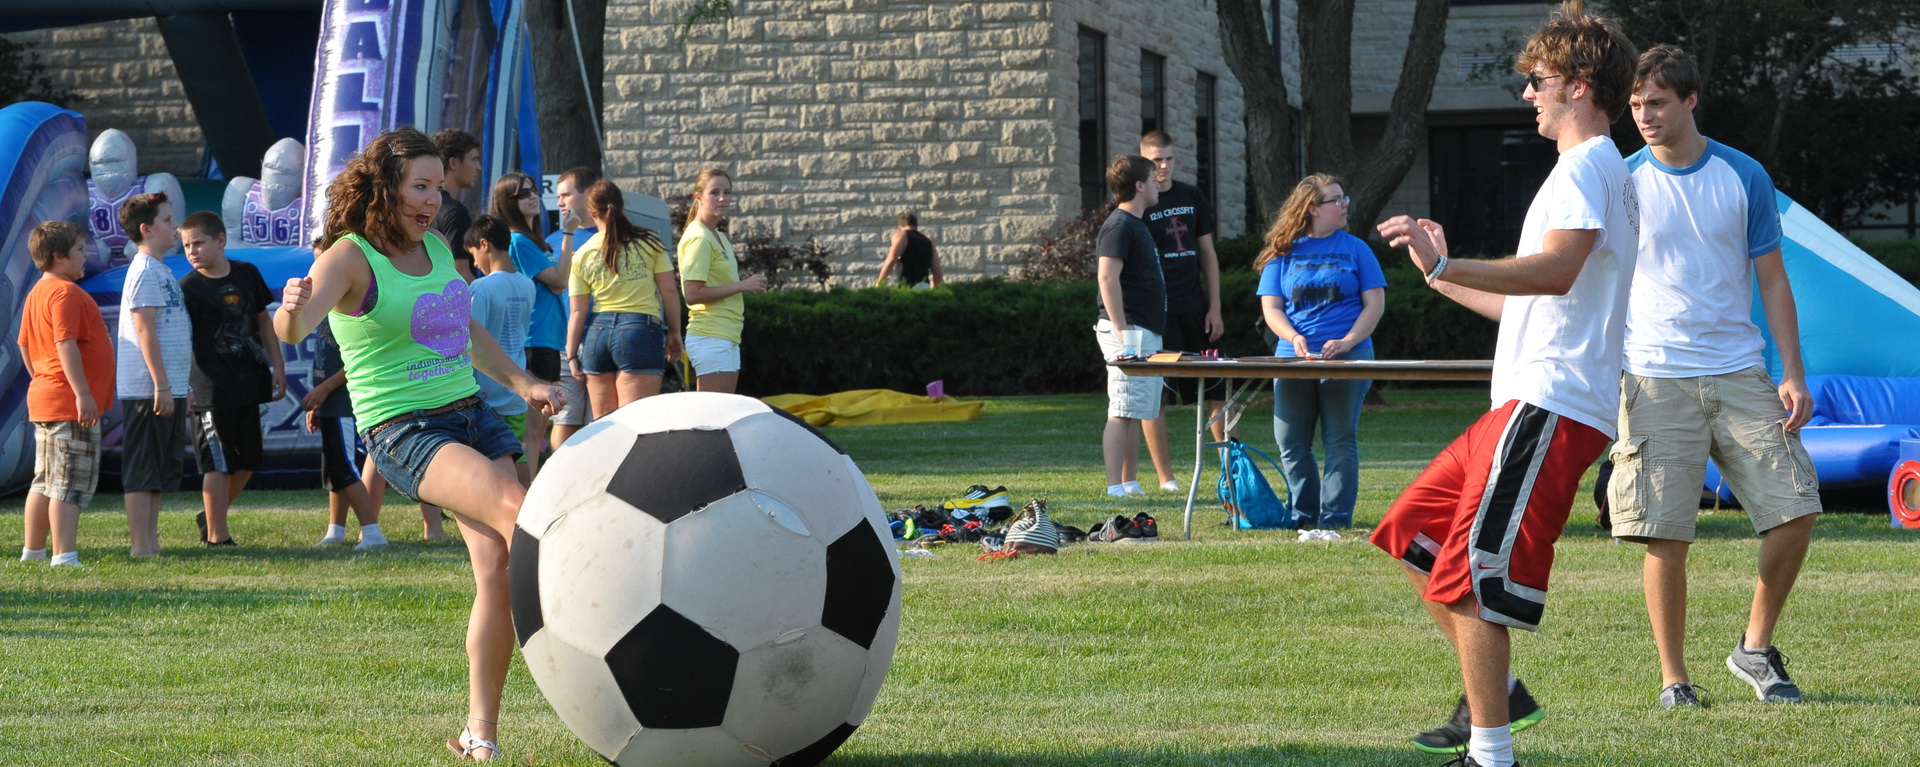 Students and children playing games on the Union Lawn